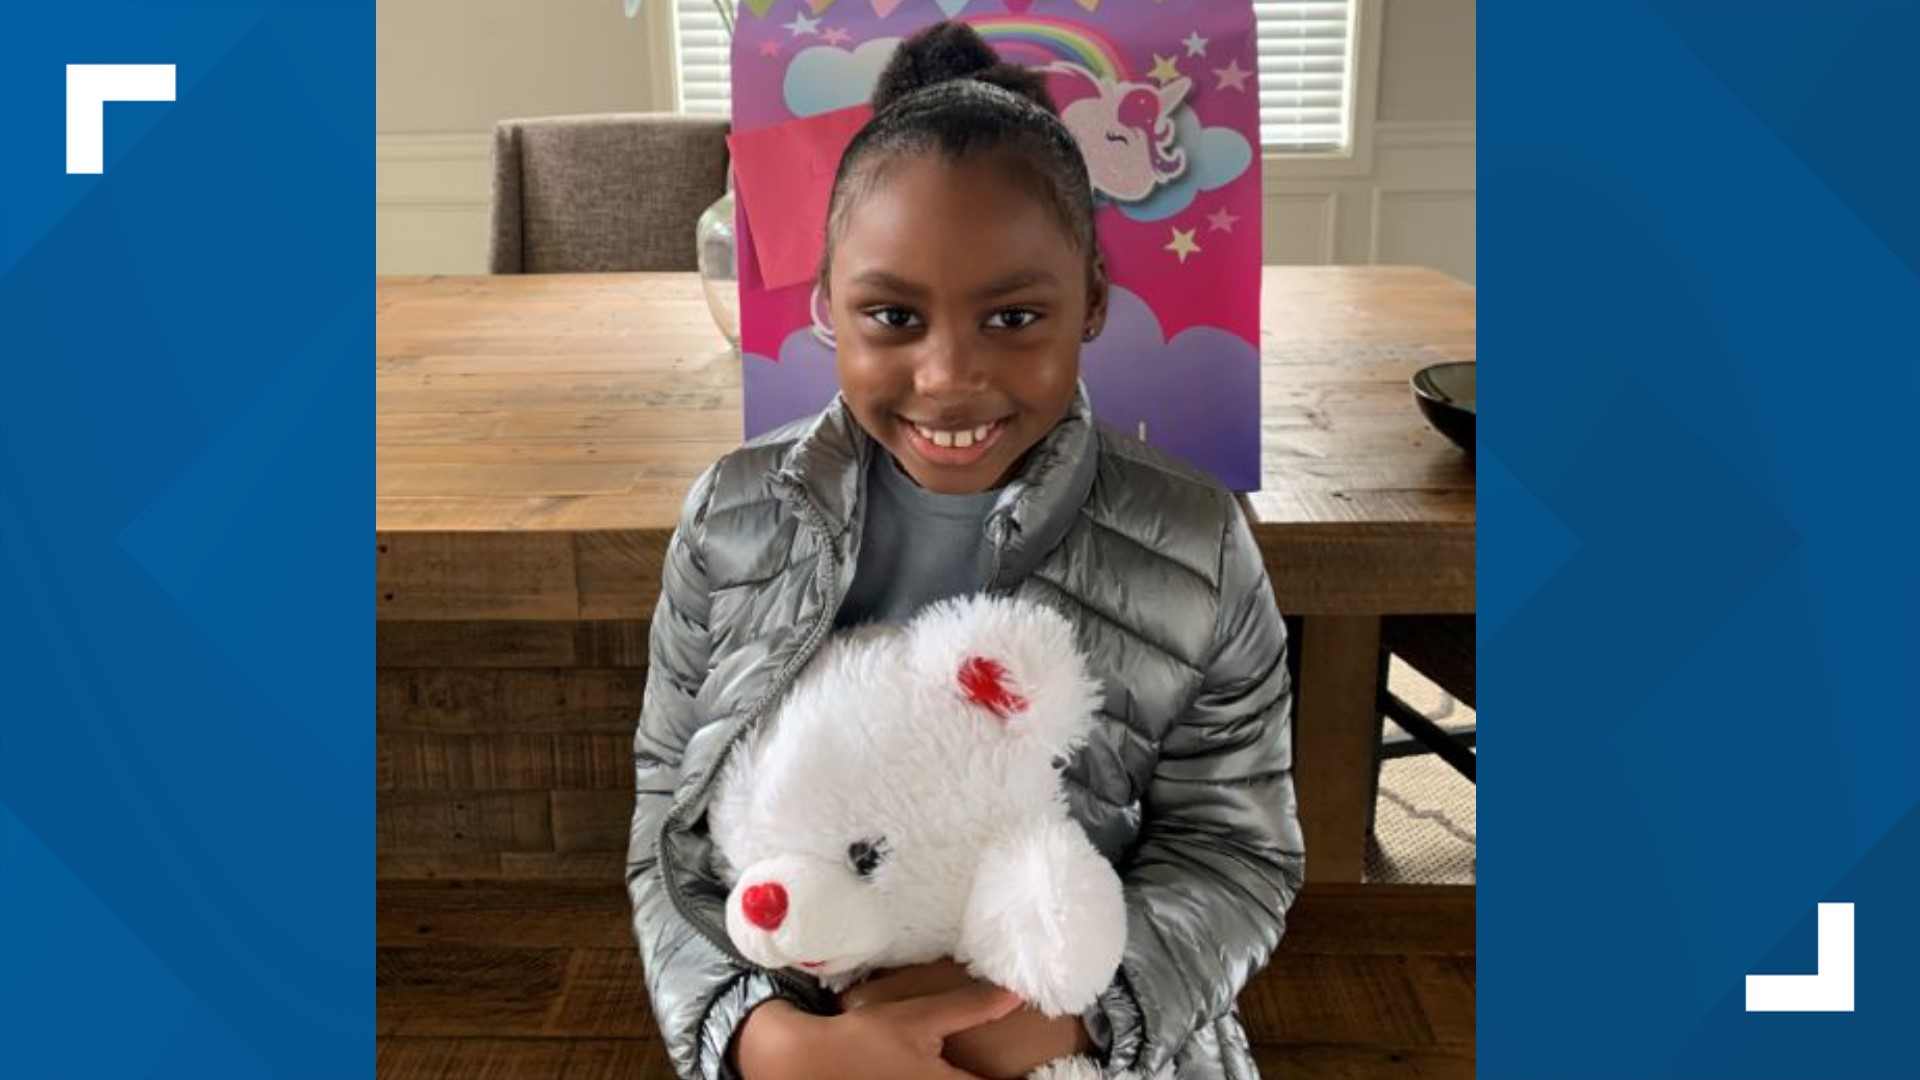 A former police officer and current attorney, Jackie Patterson's donation helped raise the reward amount for information in the child's shooting to $15,000.